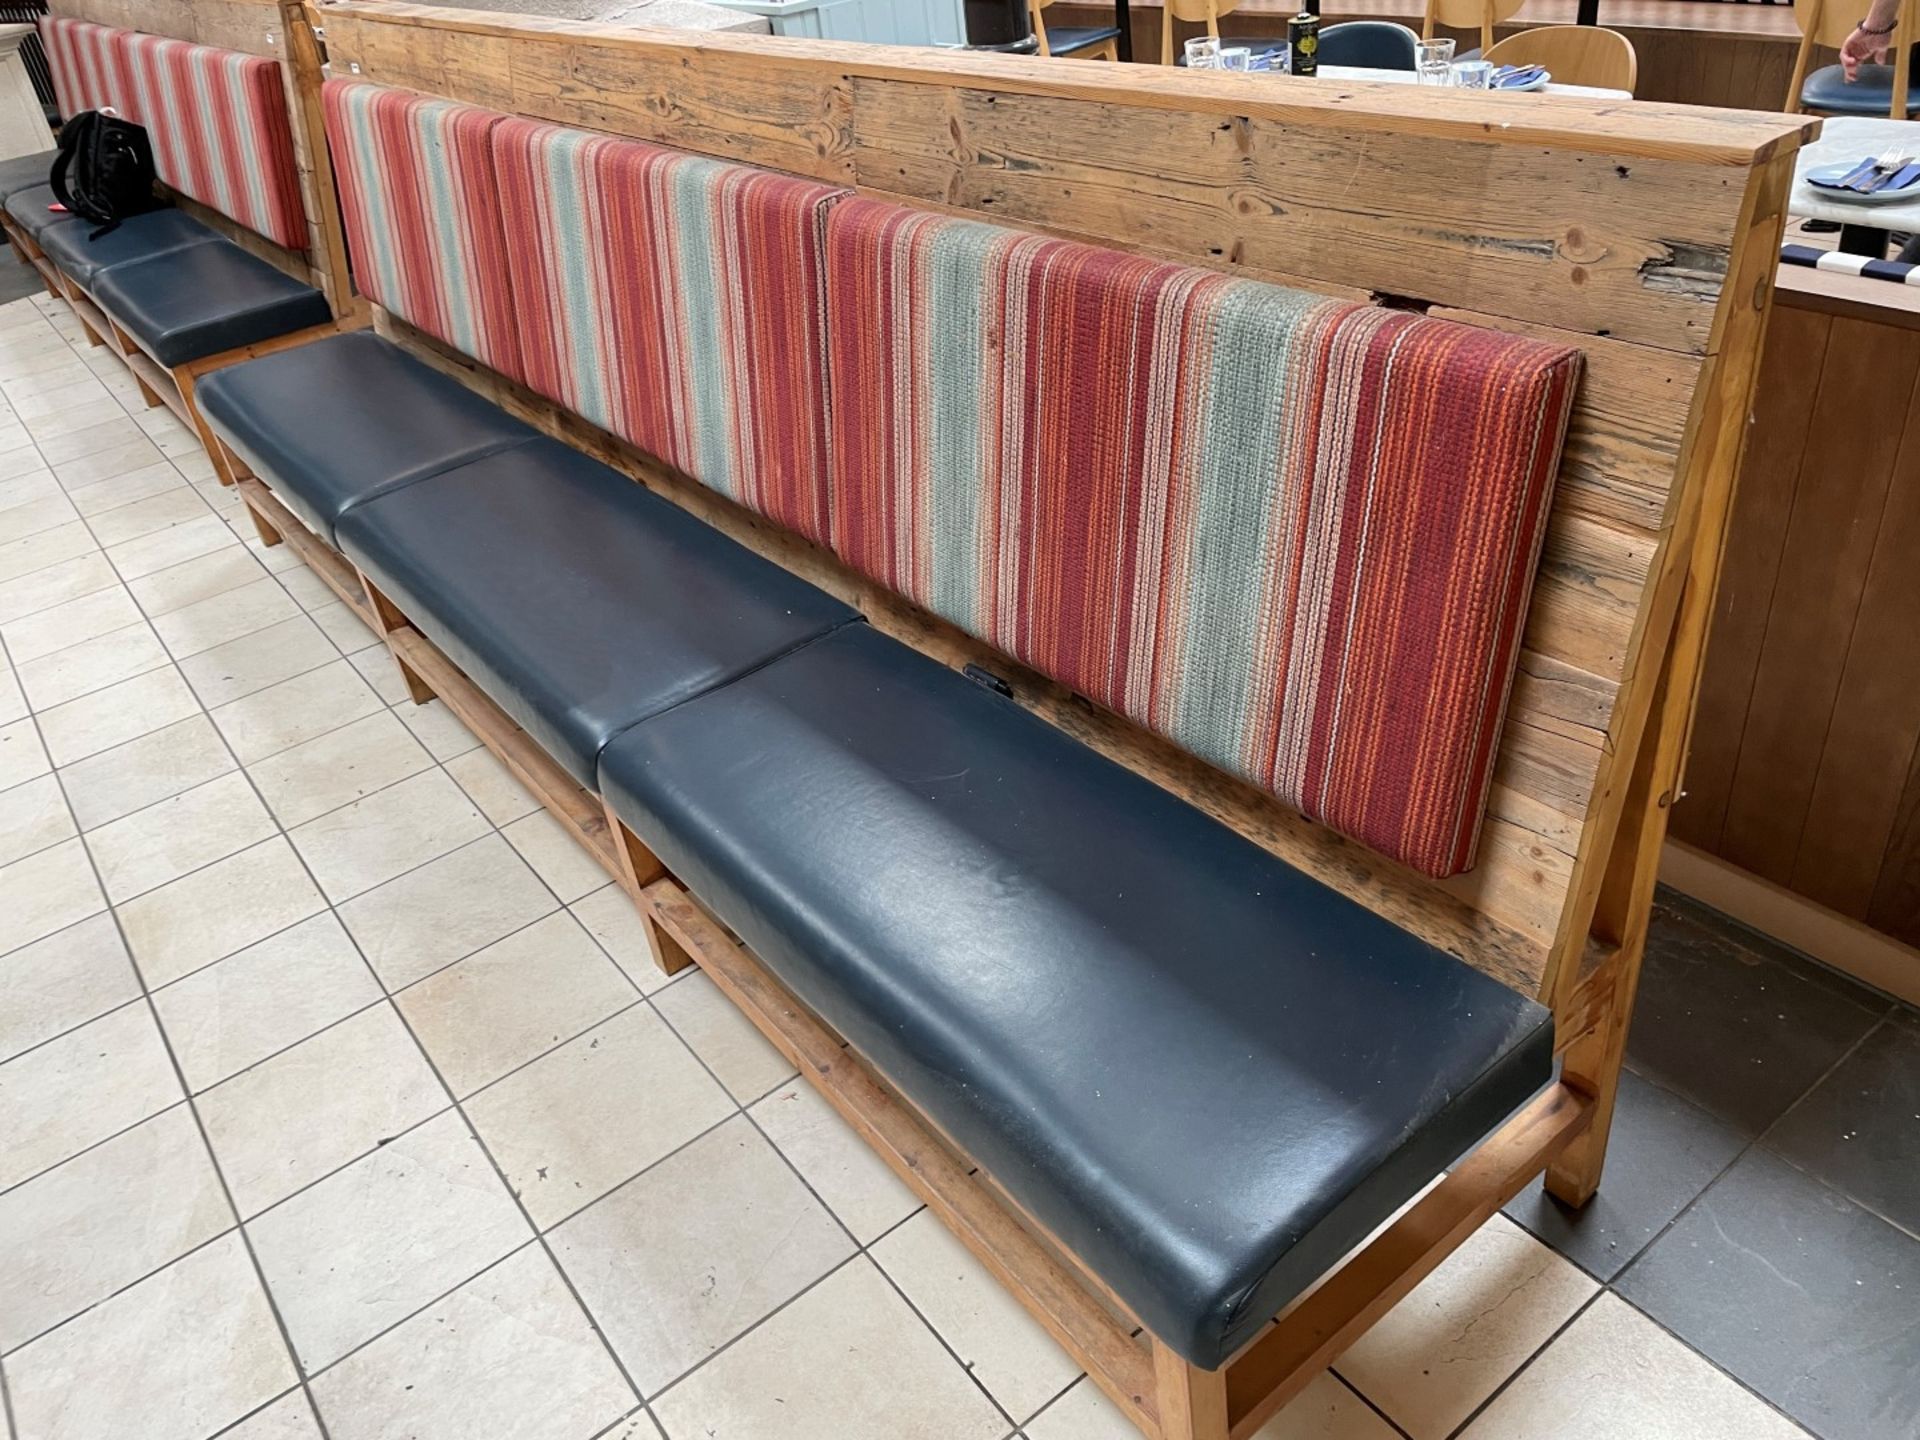 1 x Wooden Seating Bench Featuring Genuine Leather Seat Pads and Striped Fabric Back Rests - - Image 3 of 11